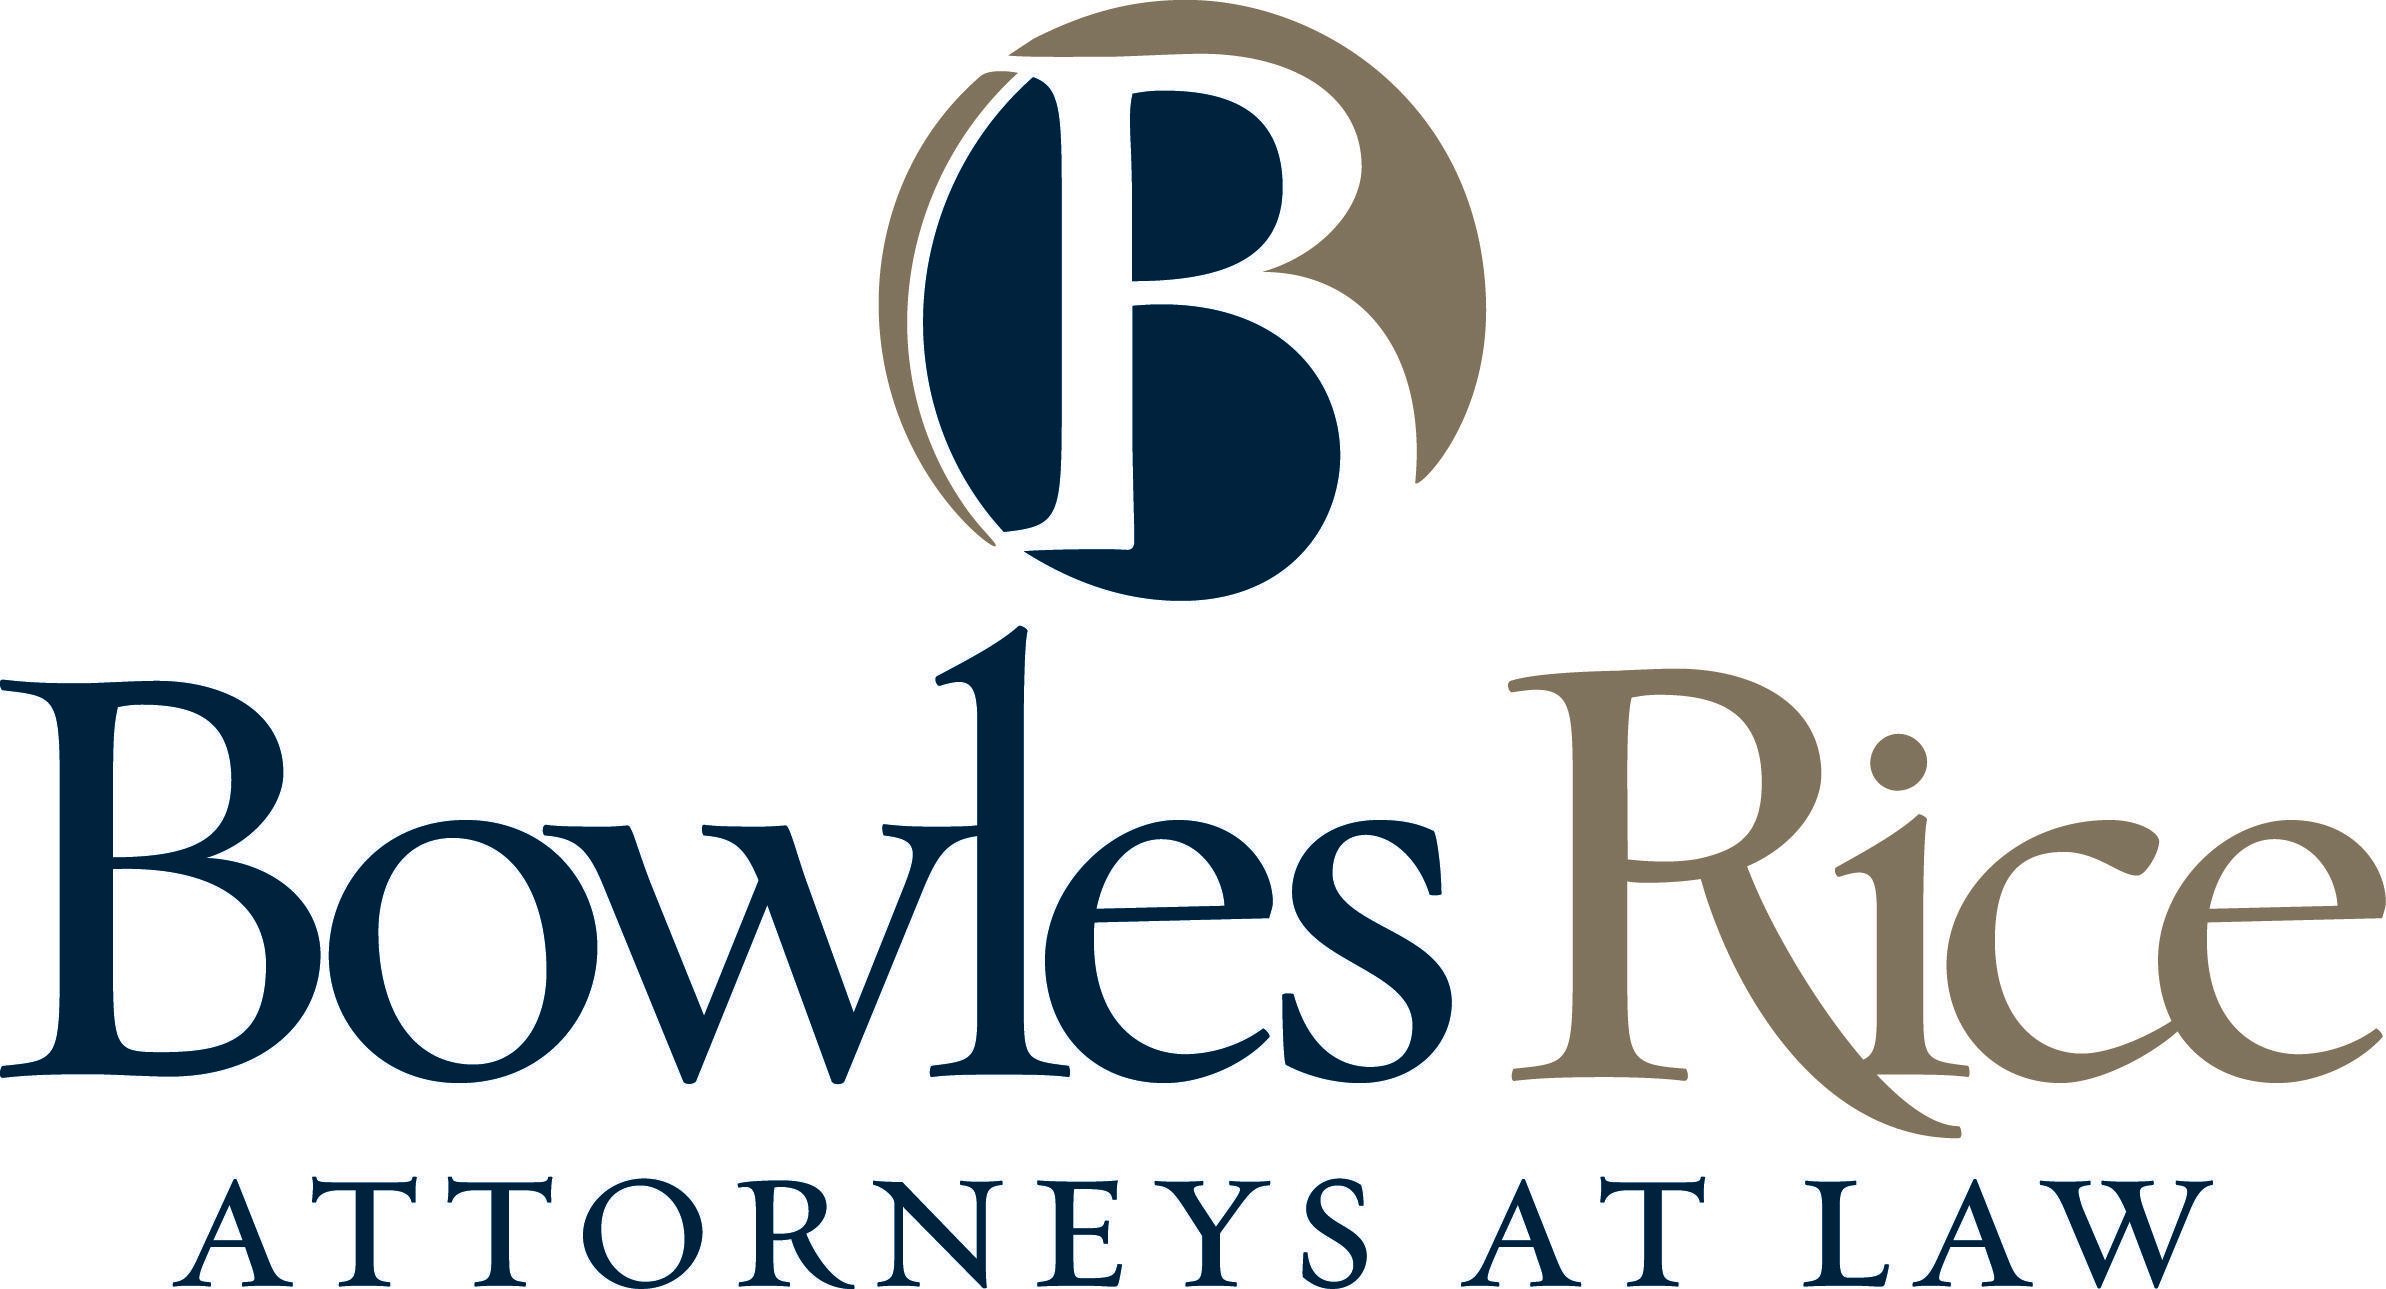 Legal Service Logo - Bowles Rice LLP | Lawyers & Legal Services - Charleston Area ...